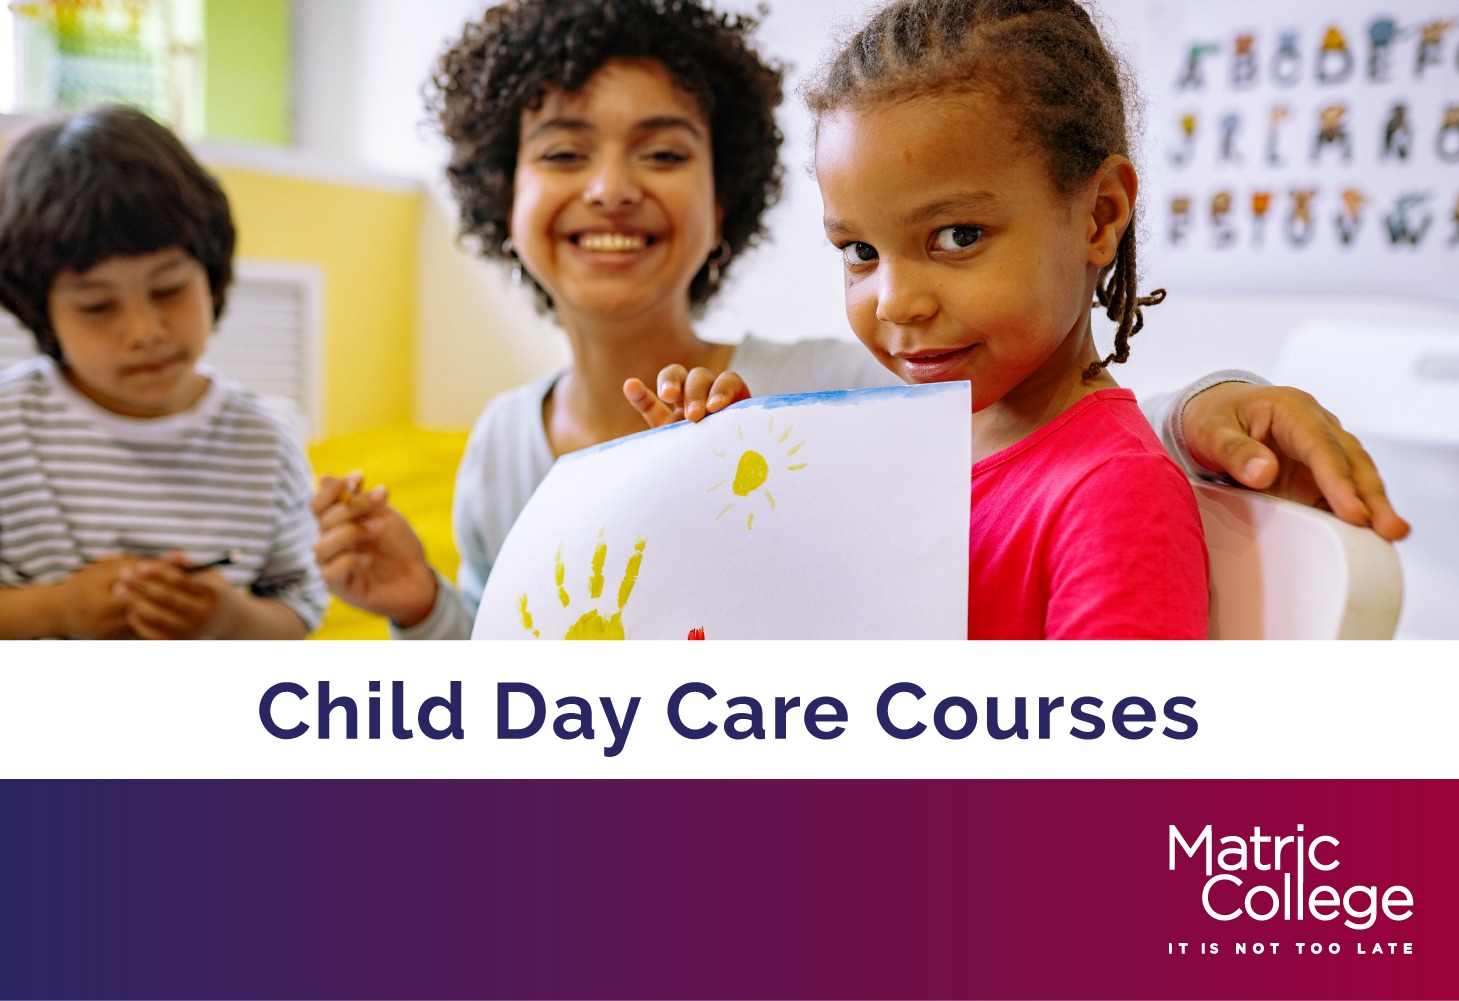 Child Day Care Courses